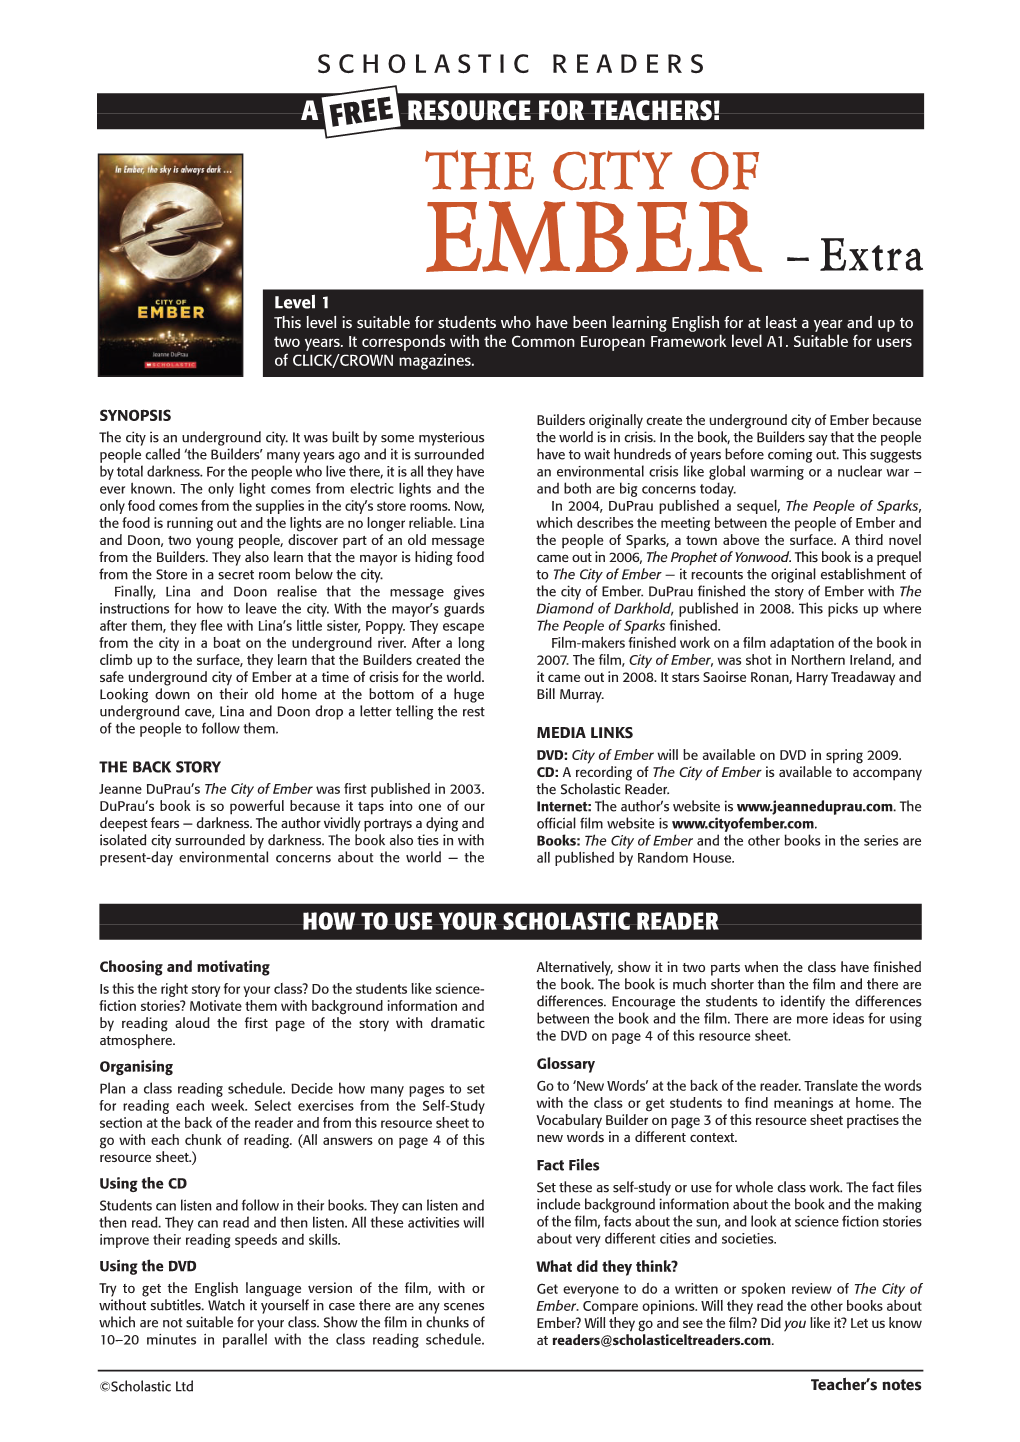 THE CITY of EMBER –Extra Level 1 This Level Is Suitable for Students Who Have Been Learning English for at Least a Year and up to Two Years